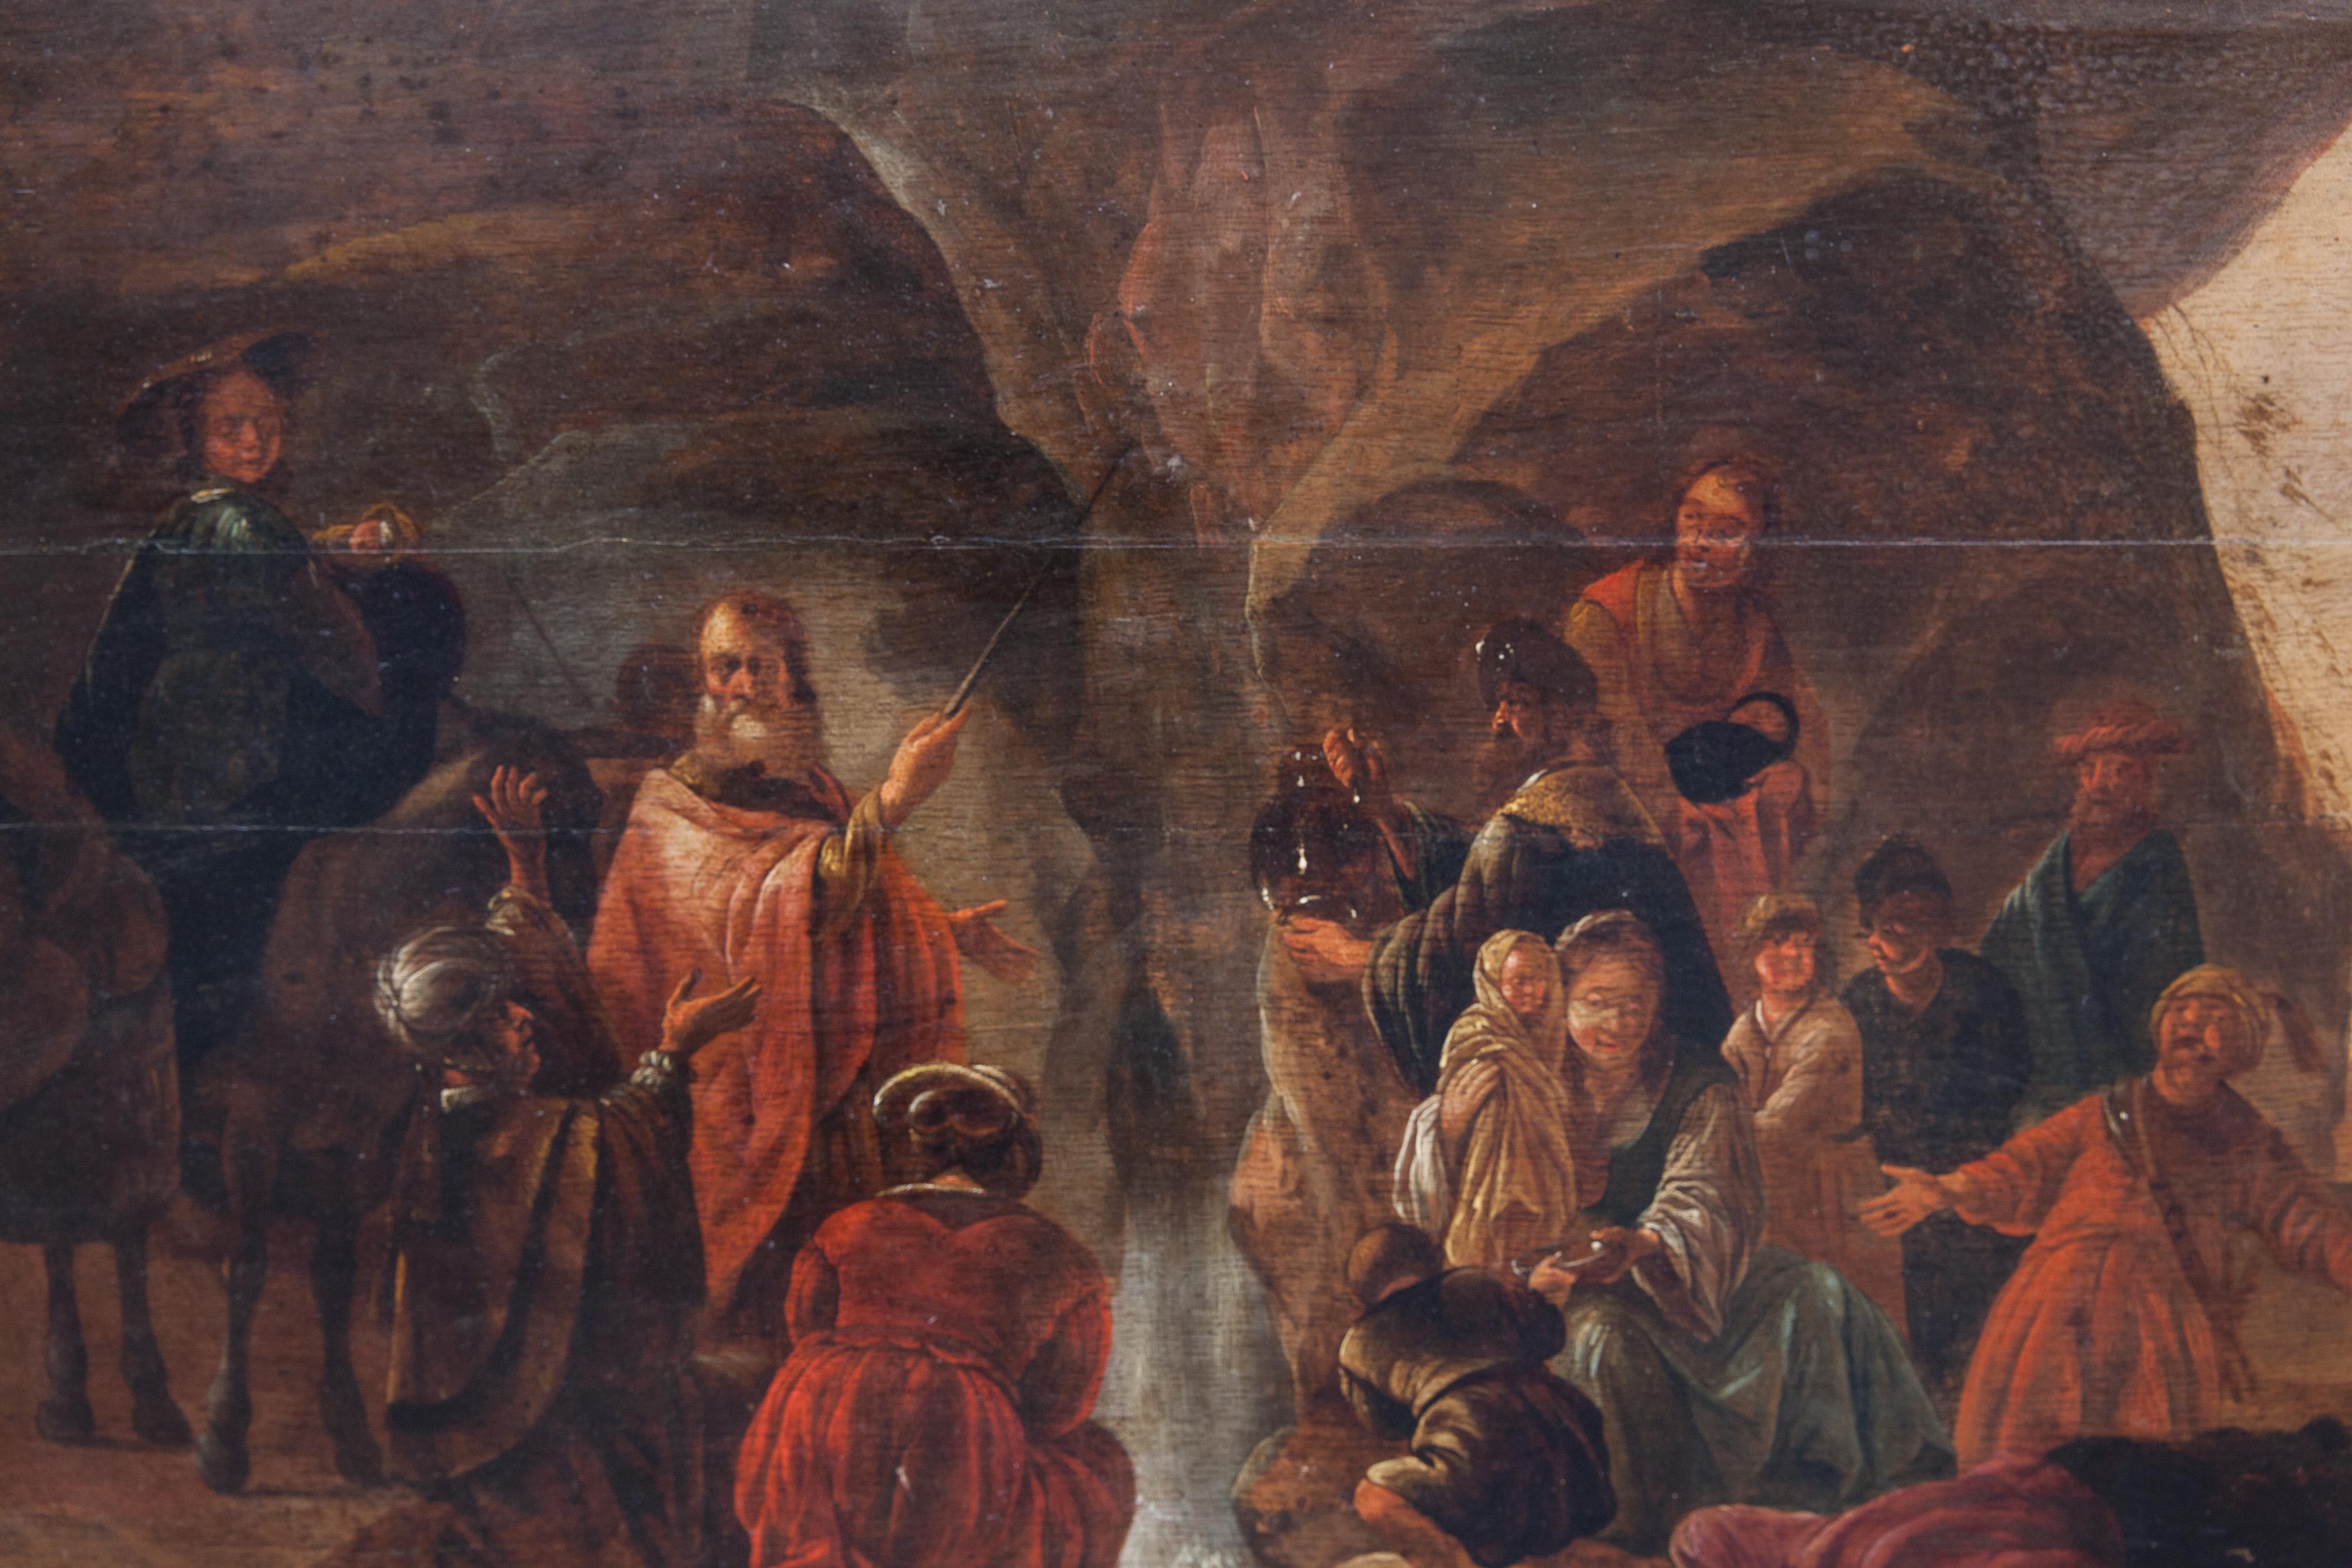 
Moses Strikes Water from the Rock Dutch school, XVII century. Workshop of Jacob de Wet (Haarlem, 1610-1675).
Technique: Oil on oak wood panel, composed of 3 horizontal panels.
In this evocative work, Moses stands in a cave, gathering the